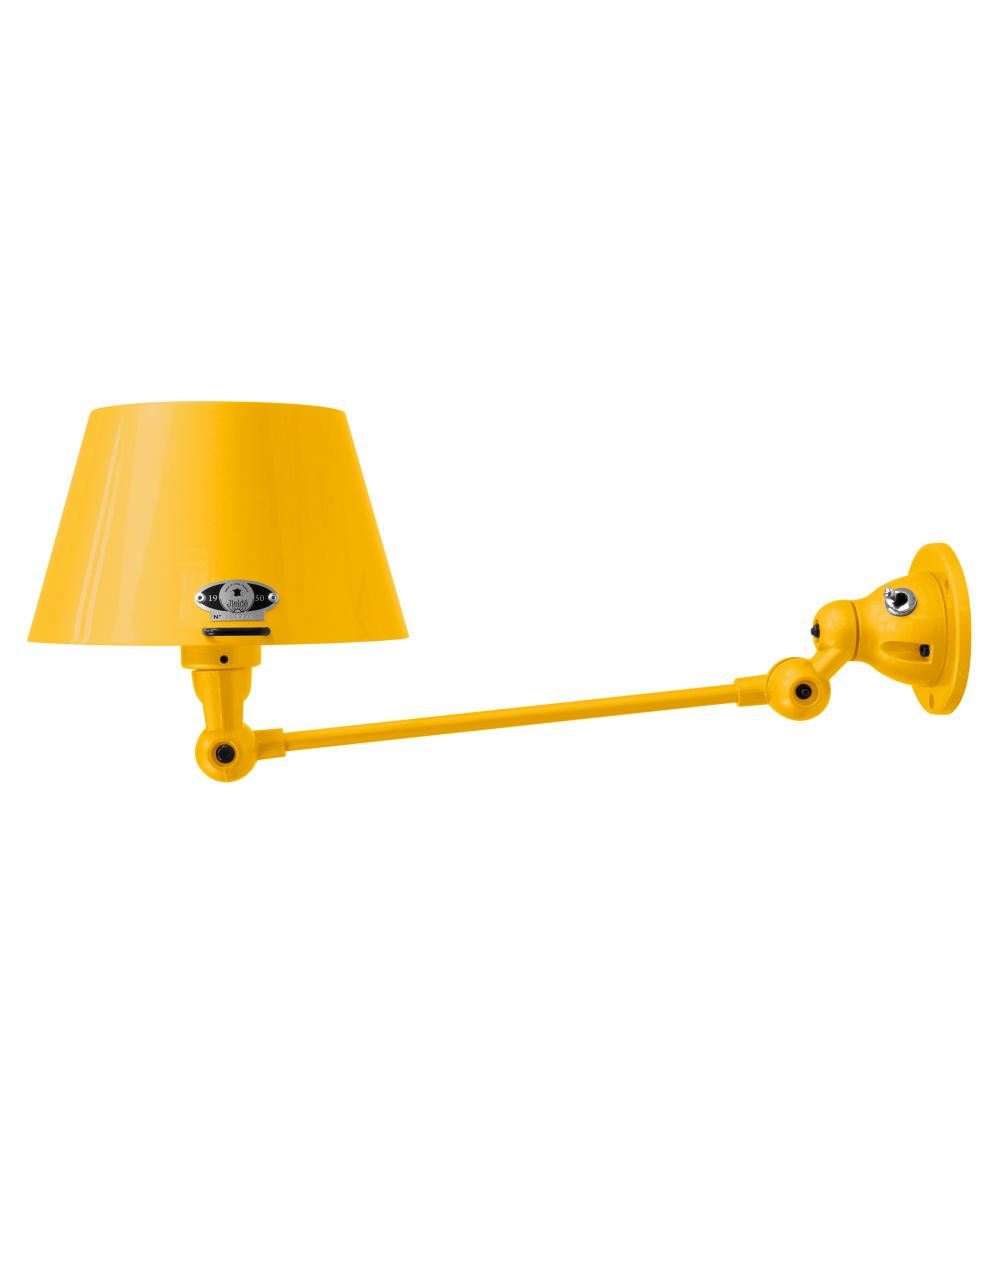 Jielde Aicler One Arm Adjustable Wall Light Straight Shade Mustard Gloss Integral Switch On Wall Base